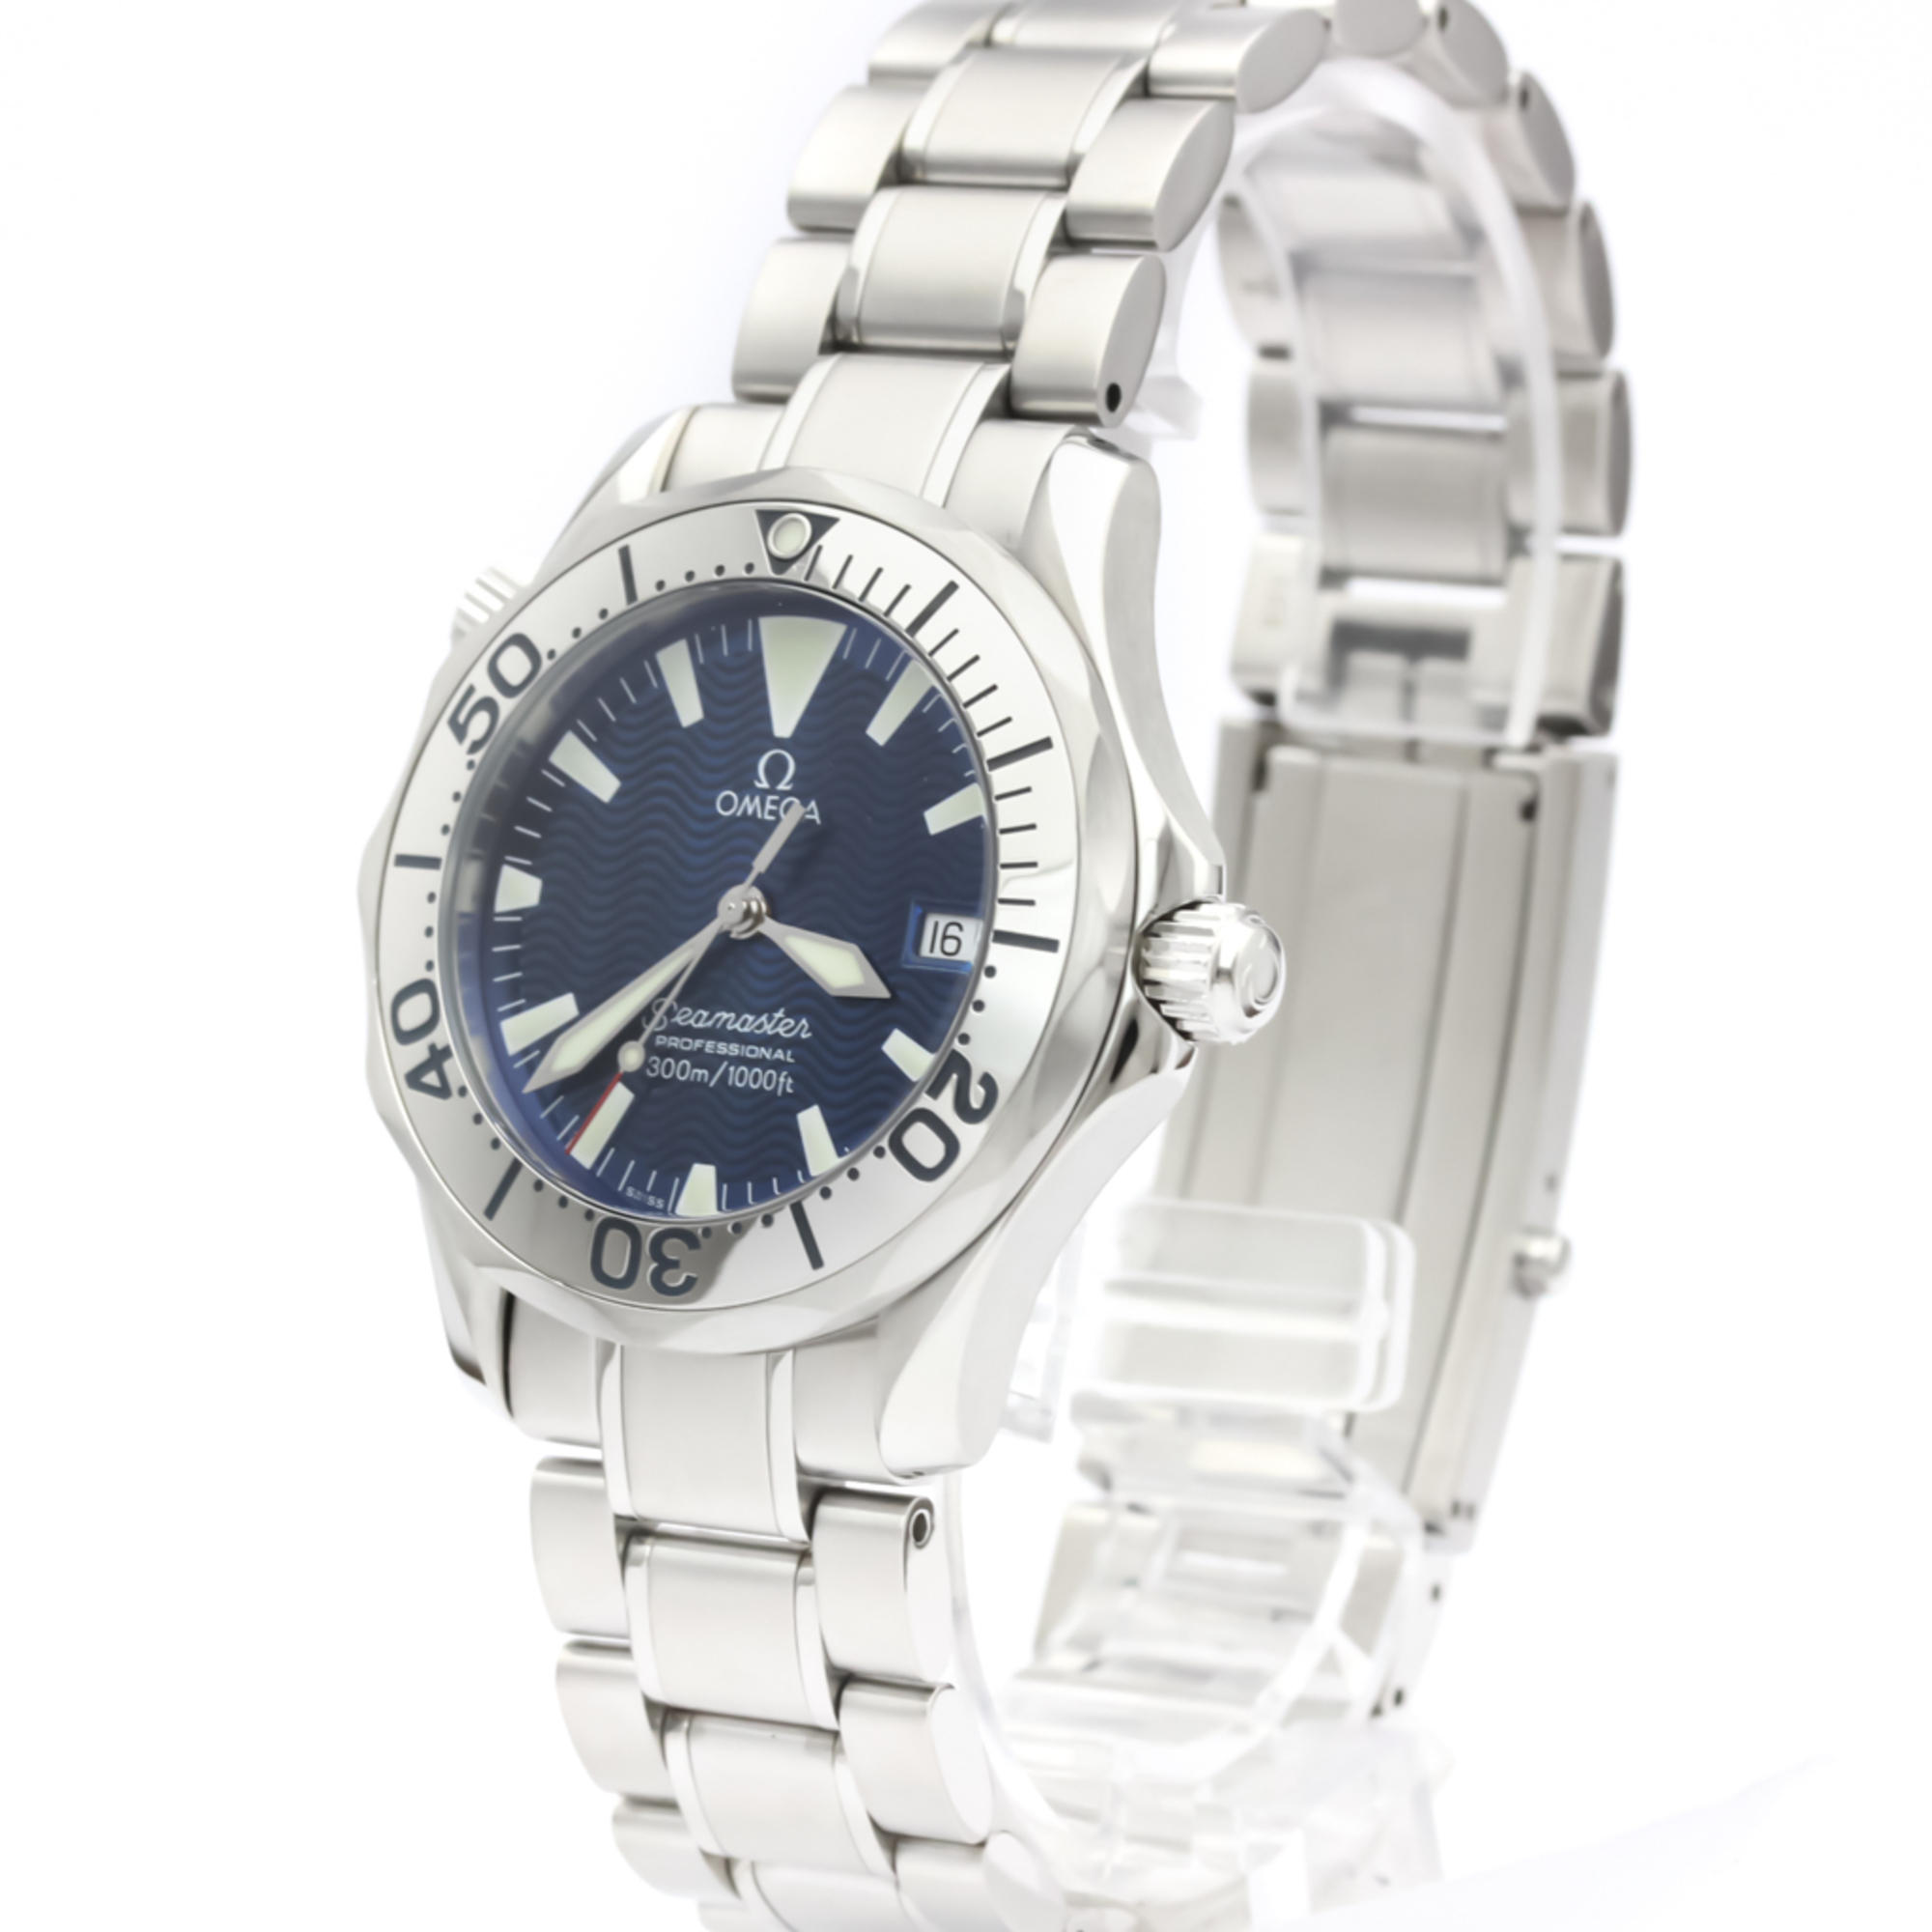 OMEGA Seamaster Professional 300M Steel Mid Size Watch 2263.80